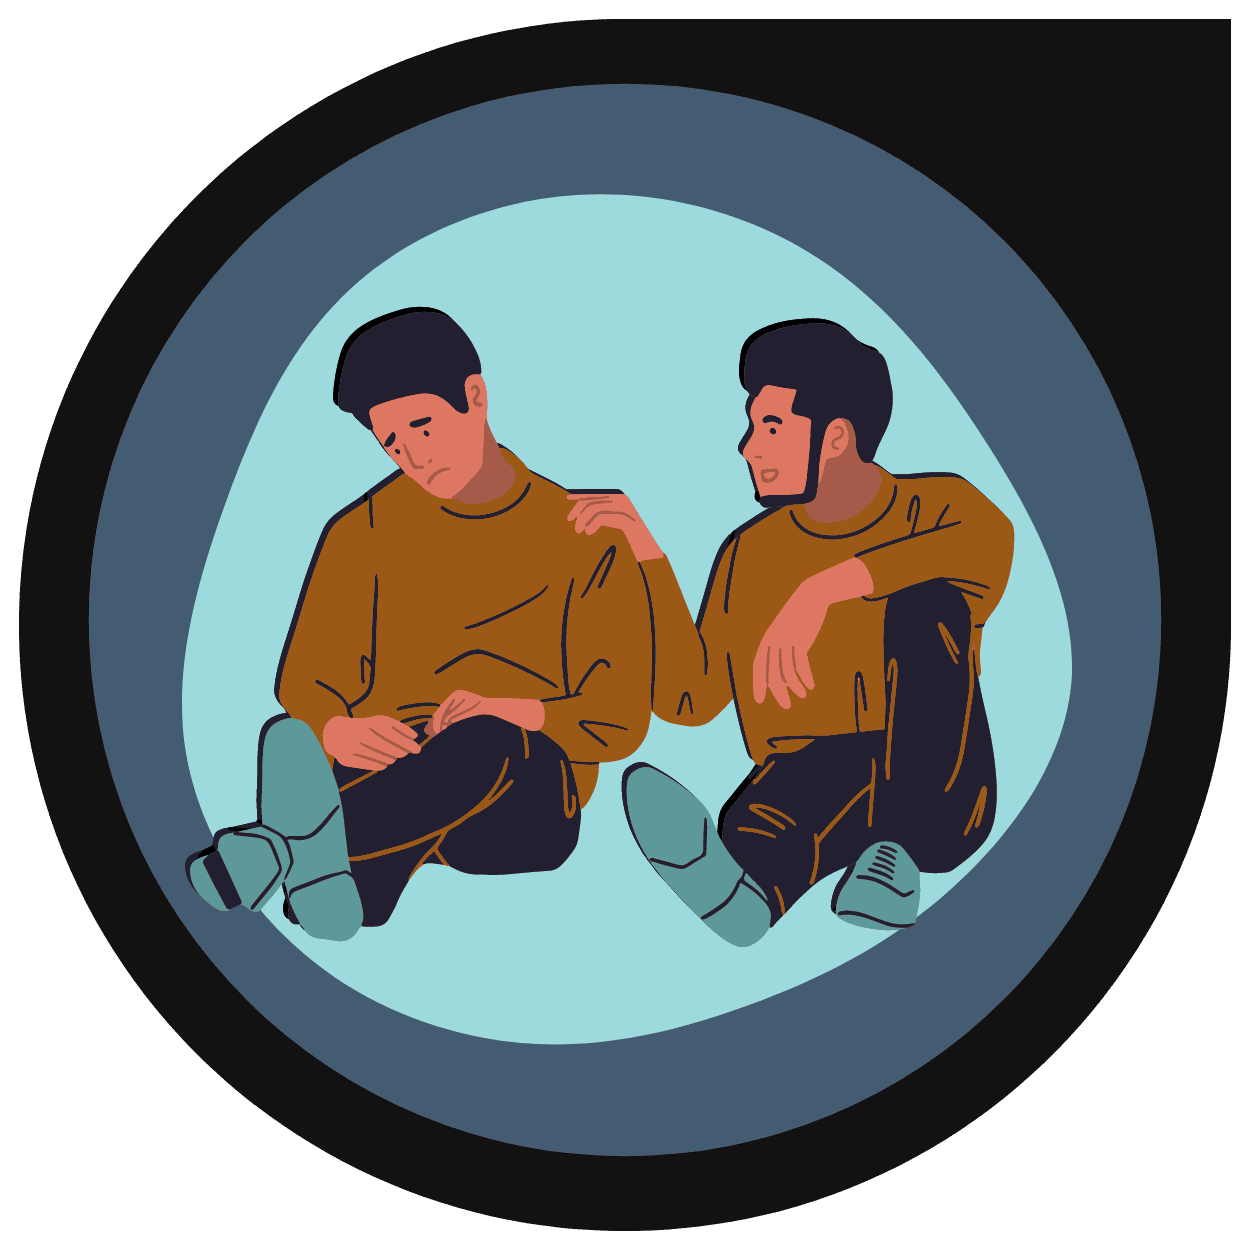 A Sketchily graphic doodle of two brown-skin people seemingly talking through a tough situation; they have brown shirts, and one person places their hand on the other's shoulder. A light teal blob separates the graphic from the deep teal and black background.